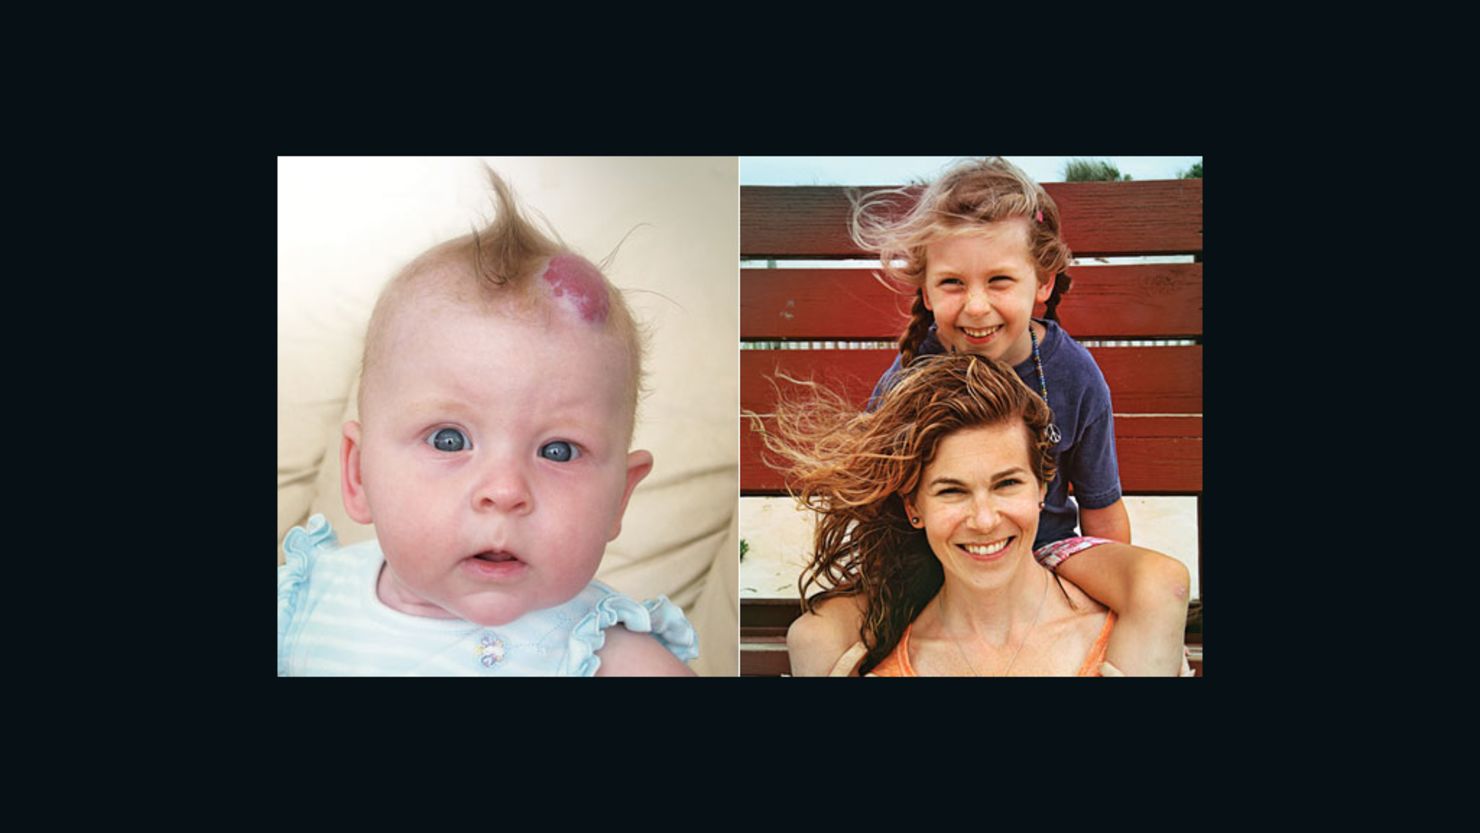 Chloe as a toddler with her birthmark, left, and the author and her daughter now, right.